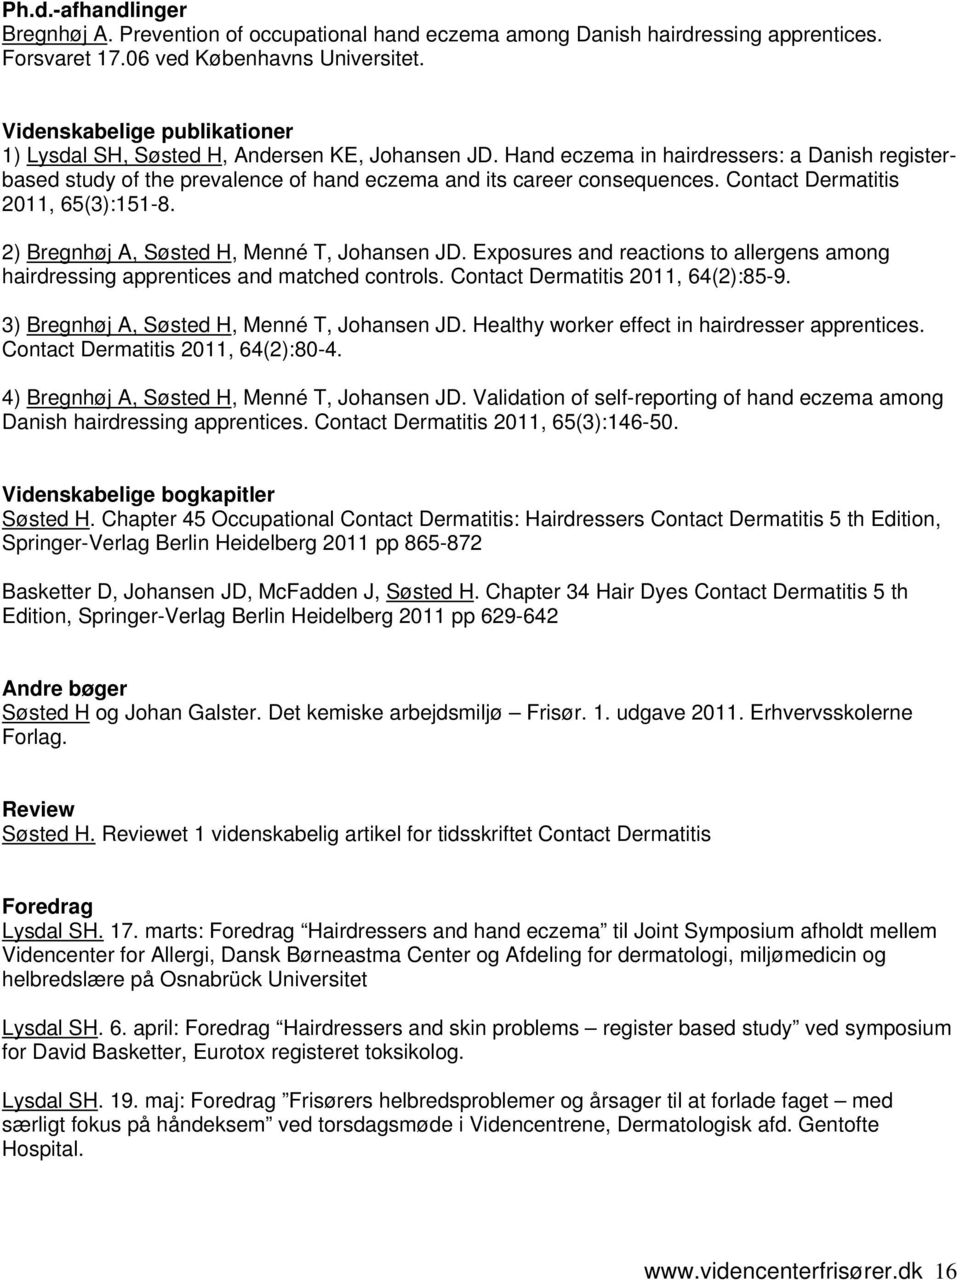 Contact Dermatitis 2011, 65(3):151-8. 2) Bregnhøj A, Søsted H, Menné T, Johansen JD. Exposures and reactions to allergens among hairdressing apprentices and matched controls.